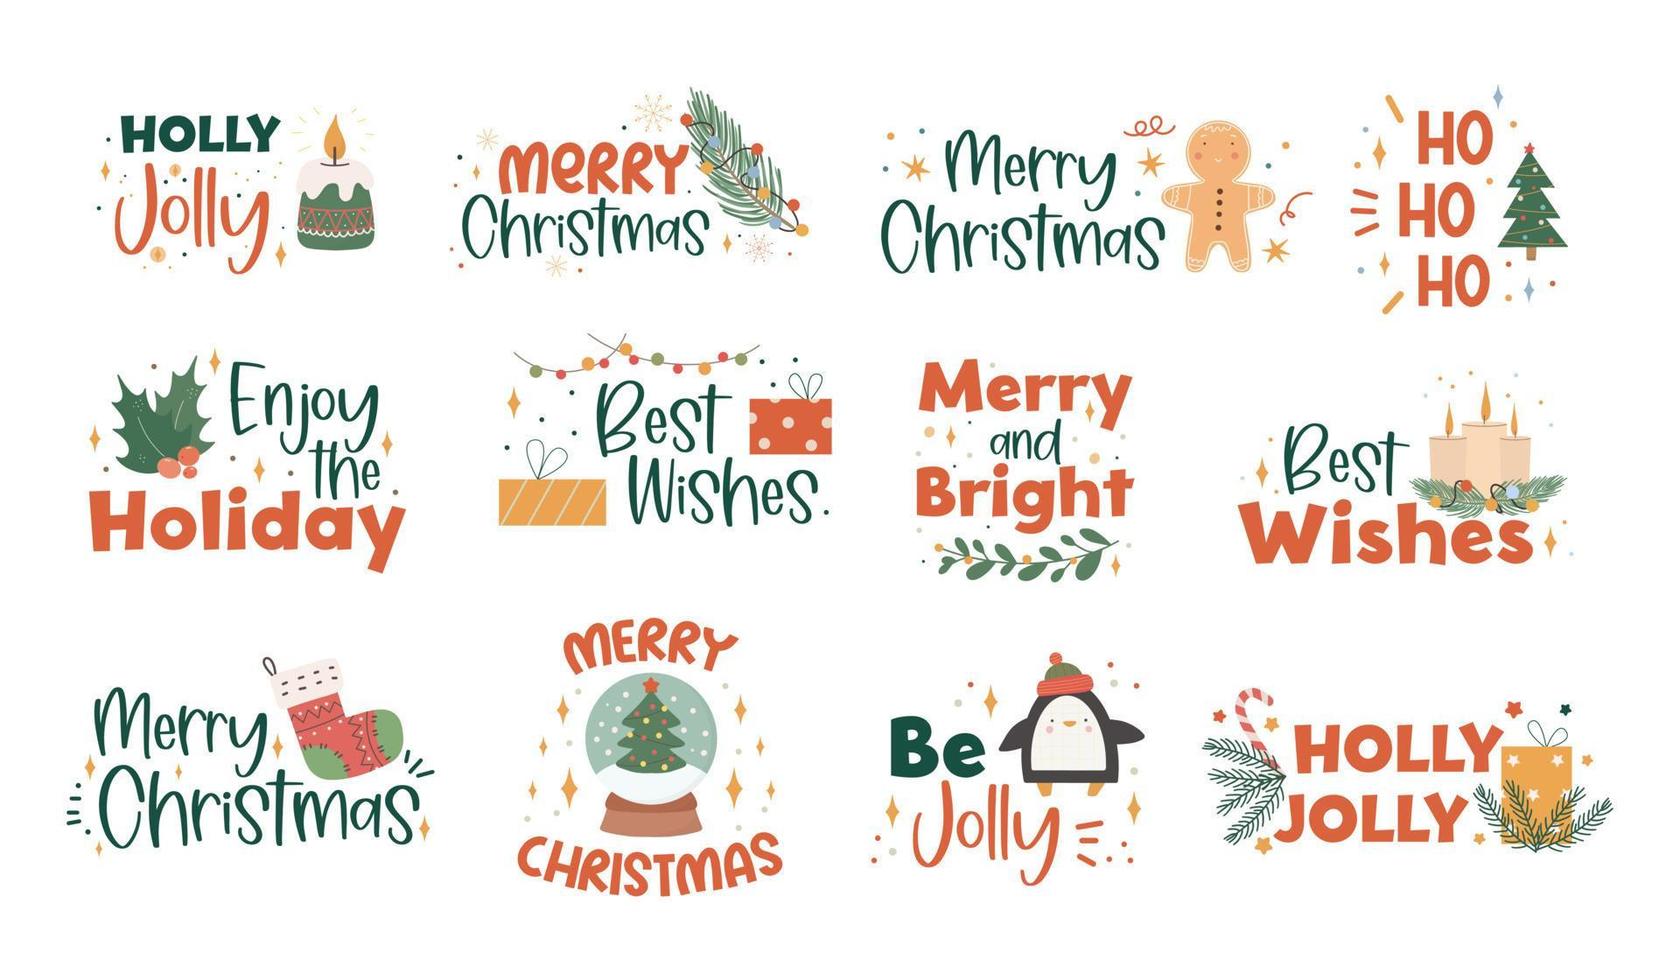 Collection of Christmas handwritten lettering with hand drawn holiday decorations - holly leaves, light garland, candles, knitted socks and gifts. Festive colorful phrases. vector